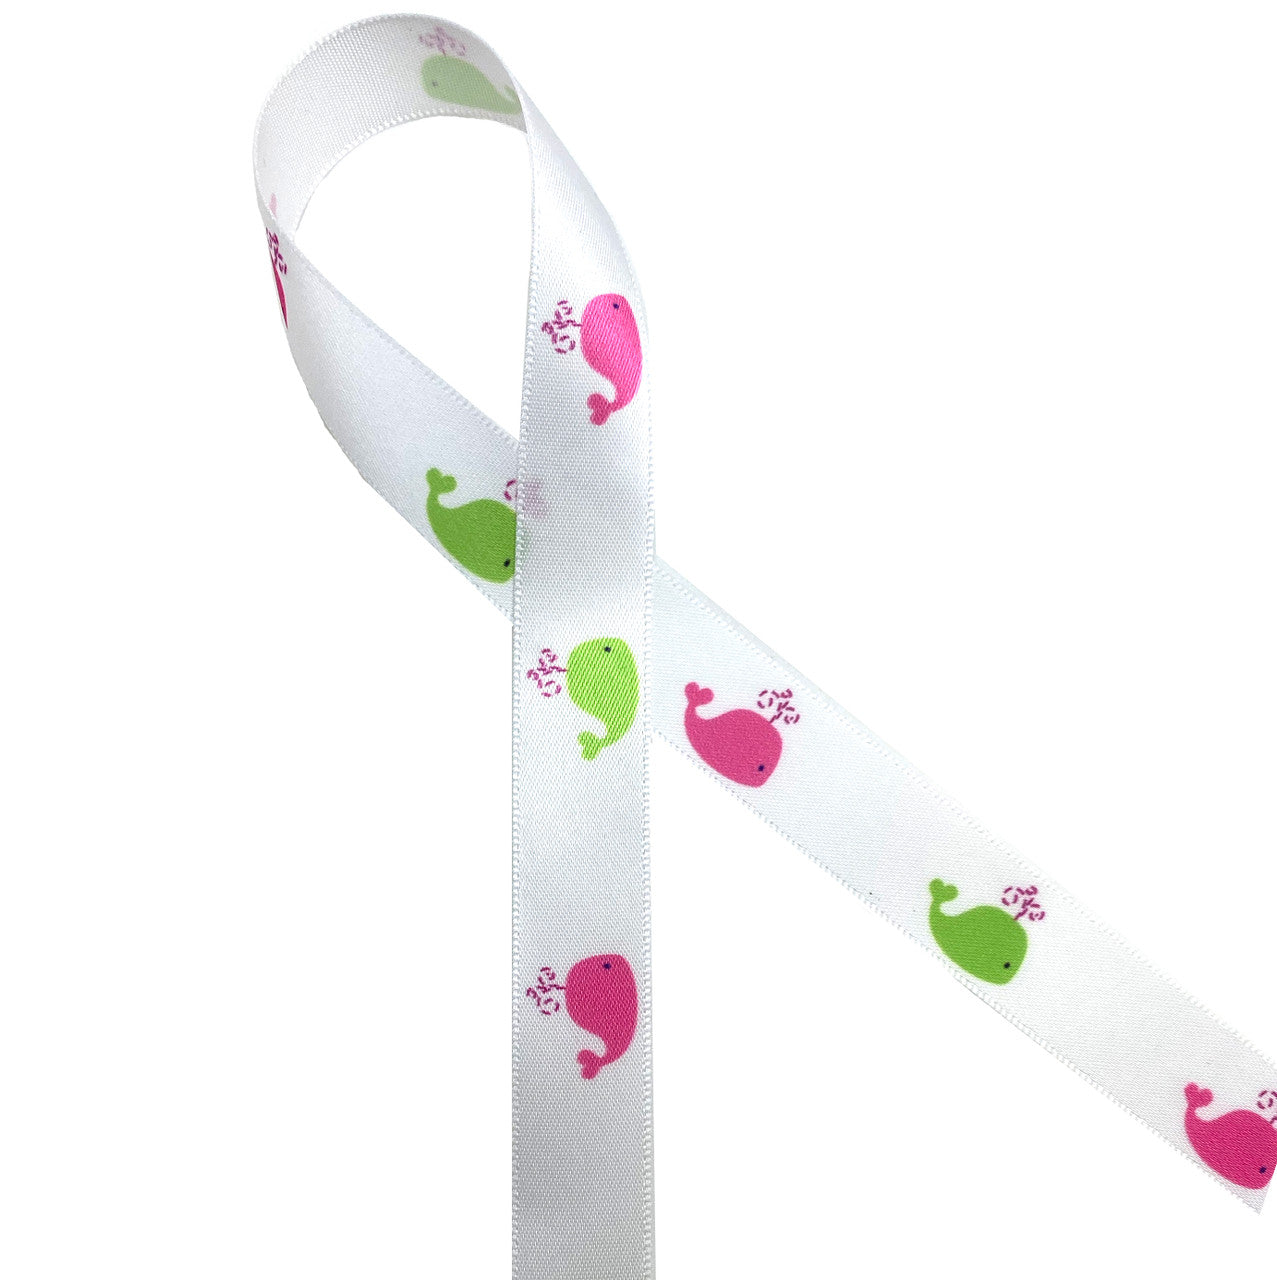 Pink and green whales printed on 5/8" white single face satin ribbon makes a fun preppy statement for Summer parties and Mother's Day gifts!